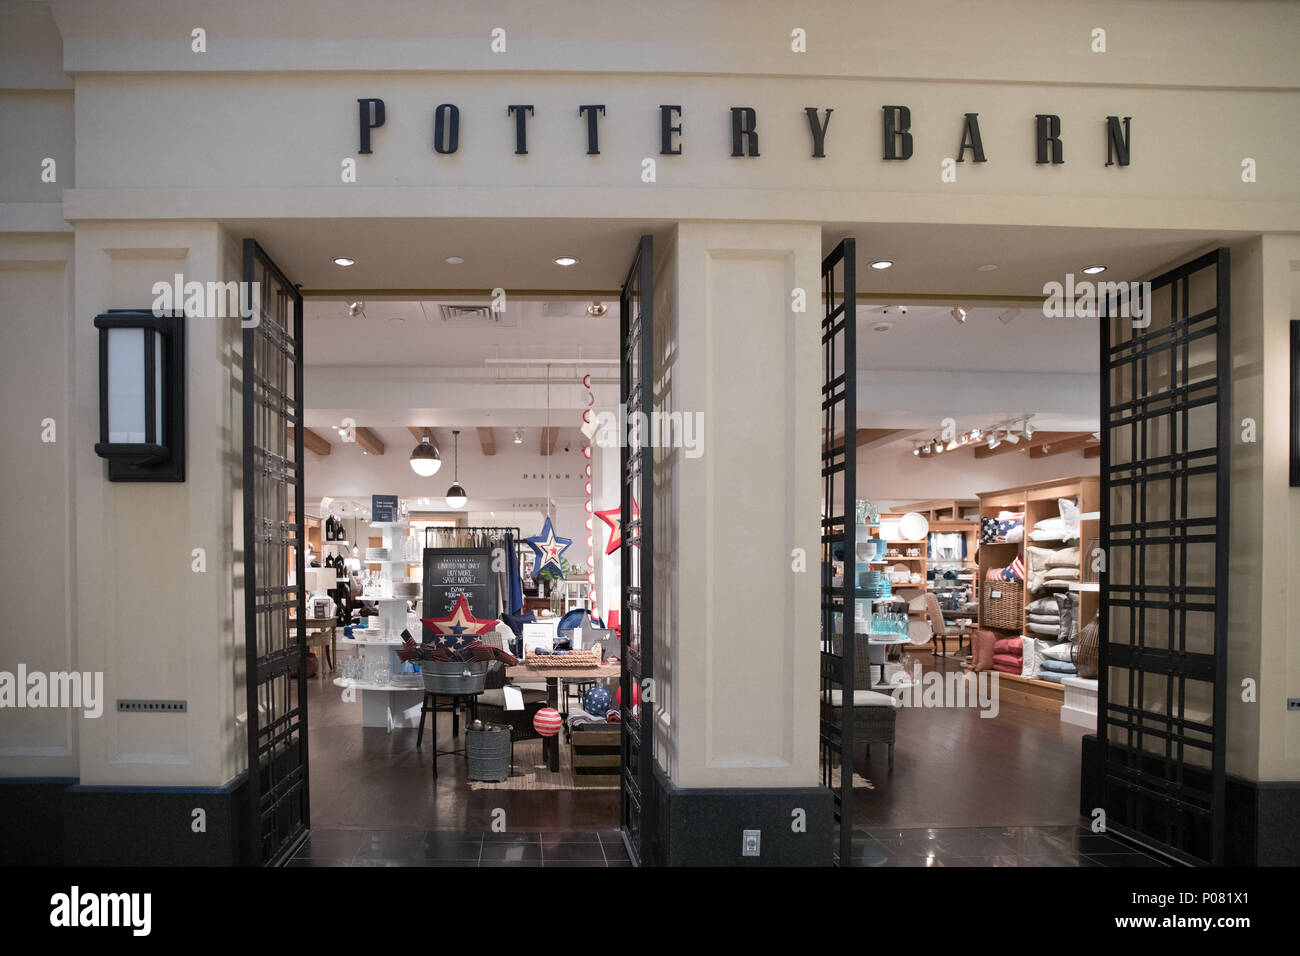 Home furnishing brand Pottery Barn comes to India - BusinessToday